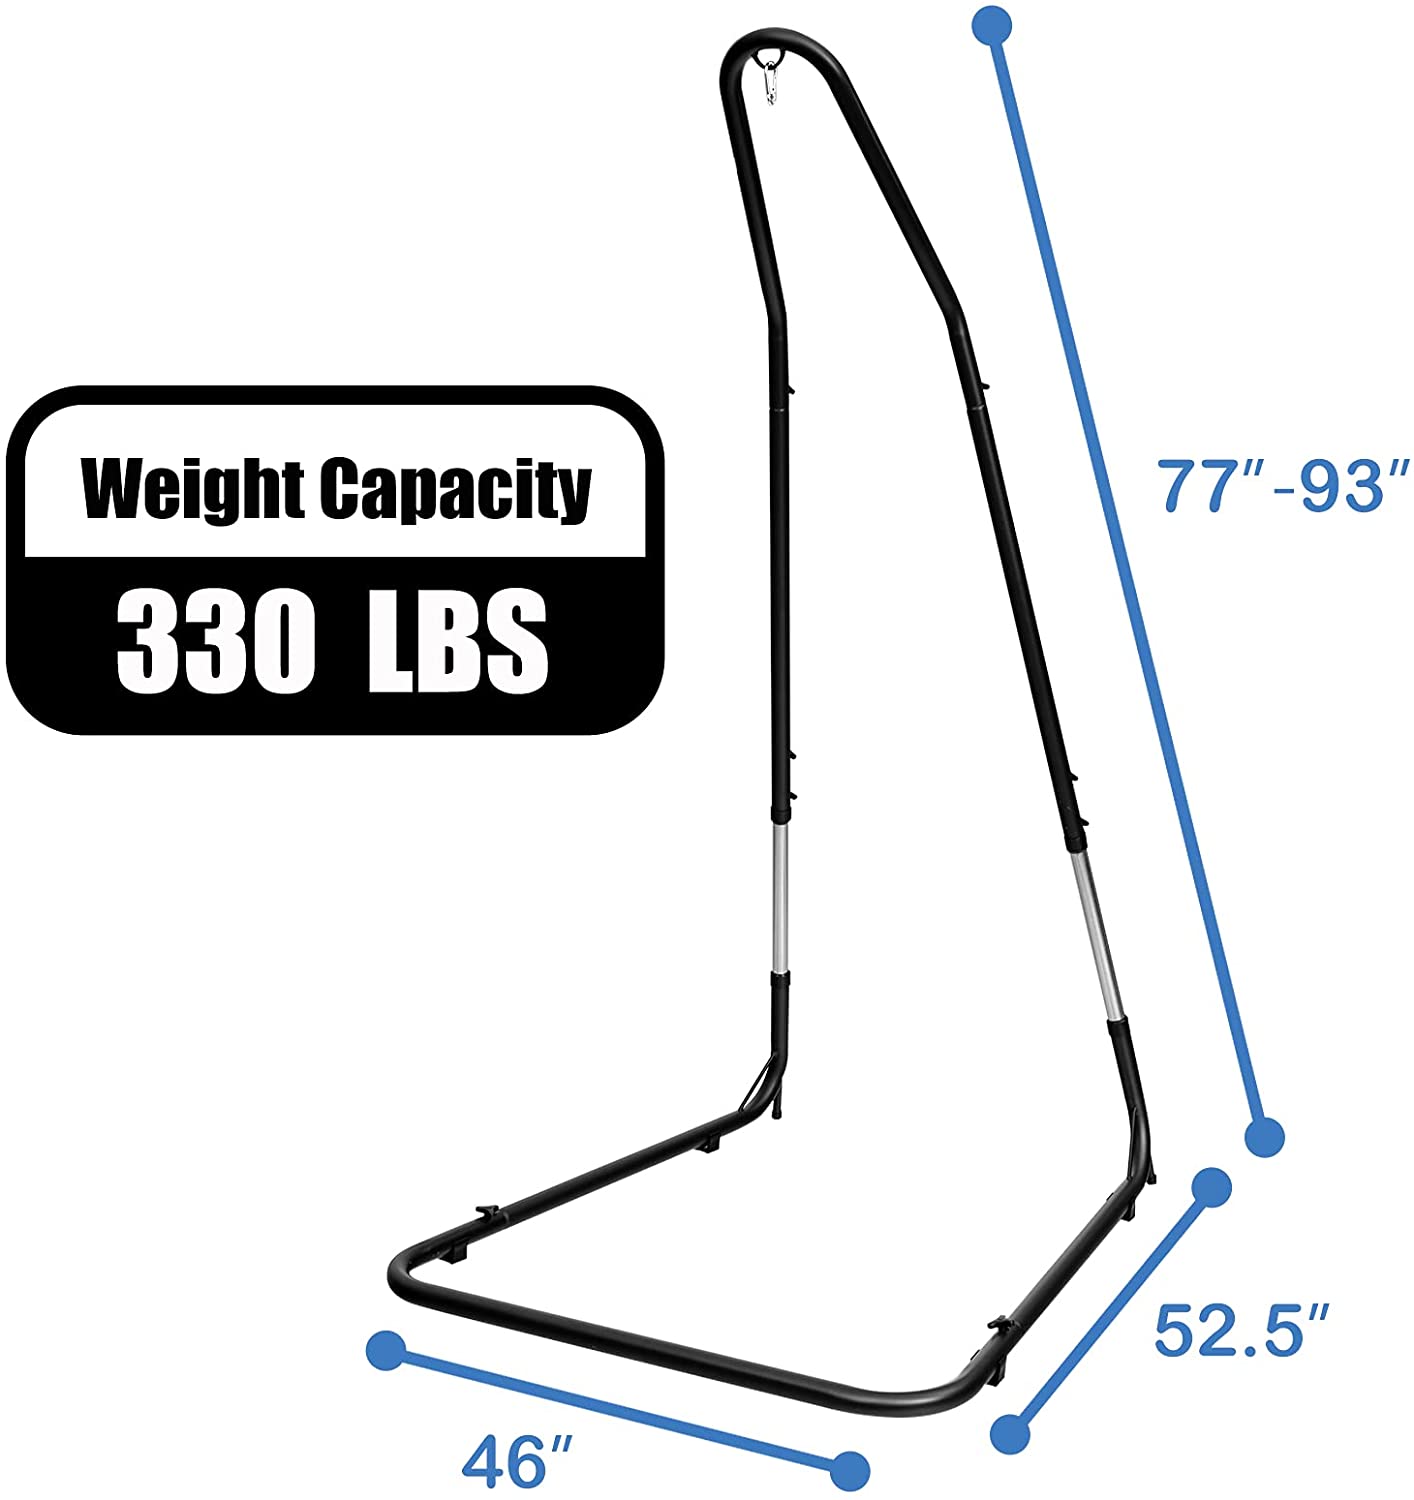 Giantex Adjustable Hammock Chair Stand, Height Adjust from 78.5" to 98.5"